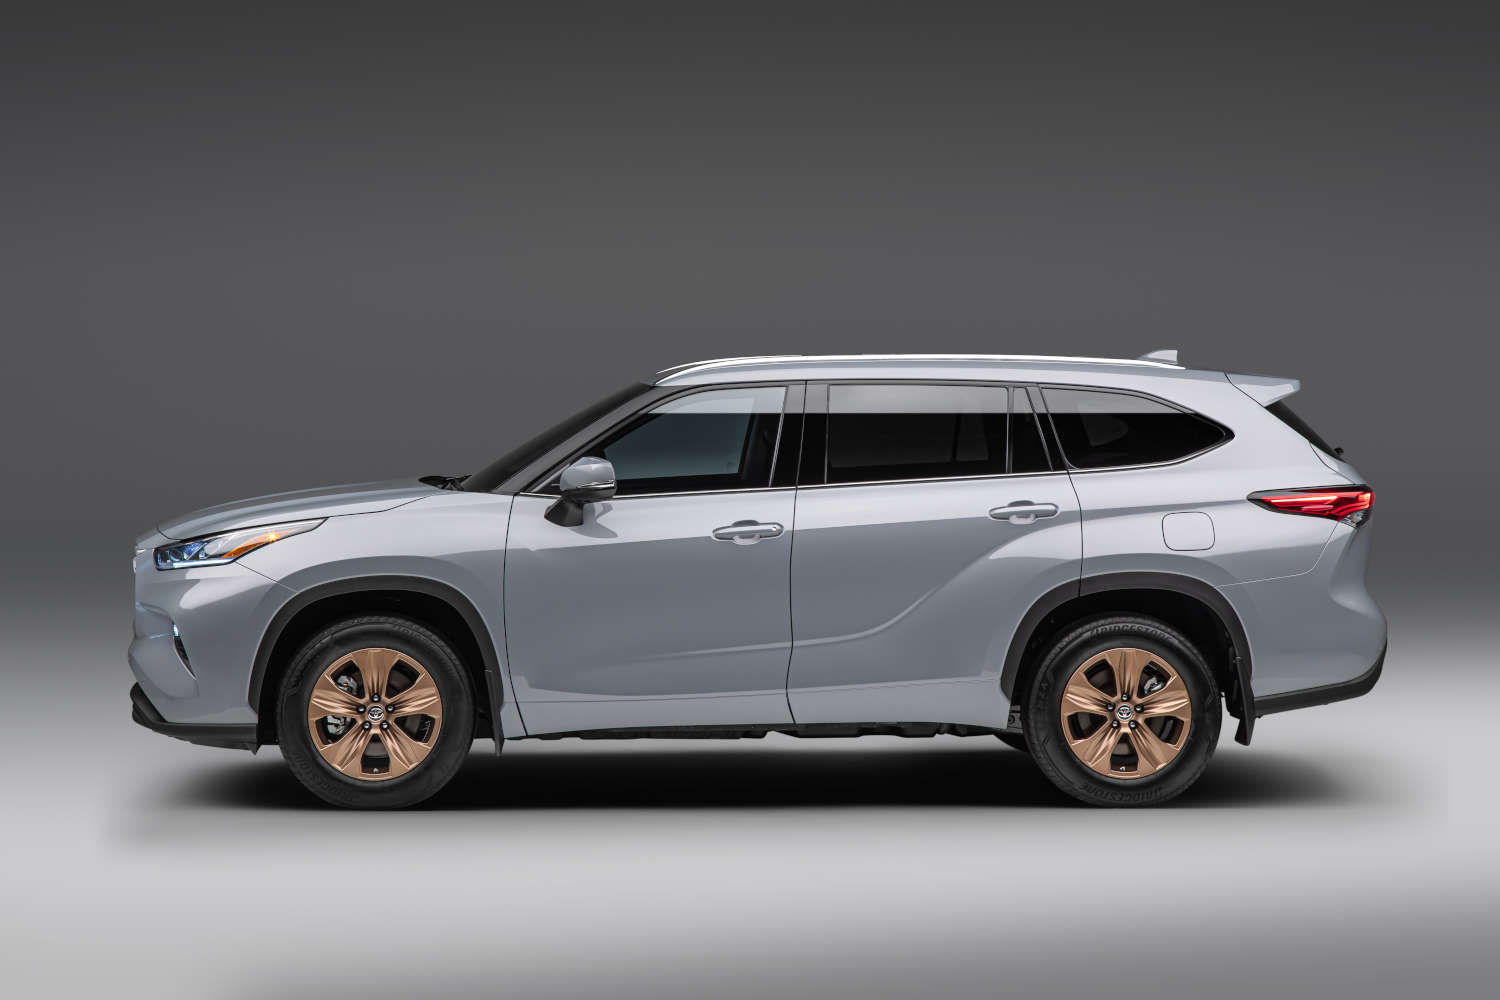 The Toyota Highlander is one of the safest new SUVs for families in 2023